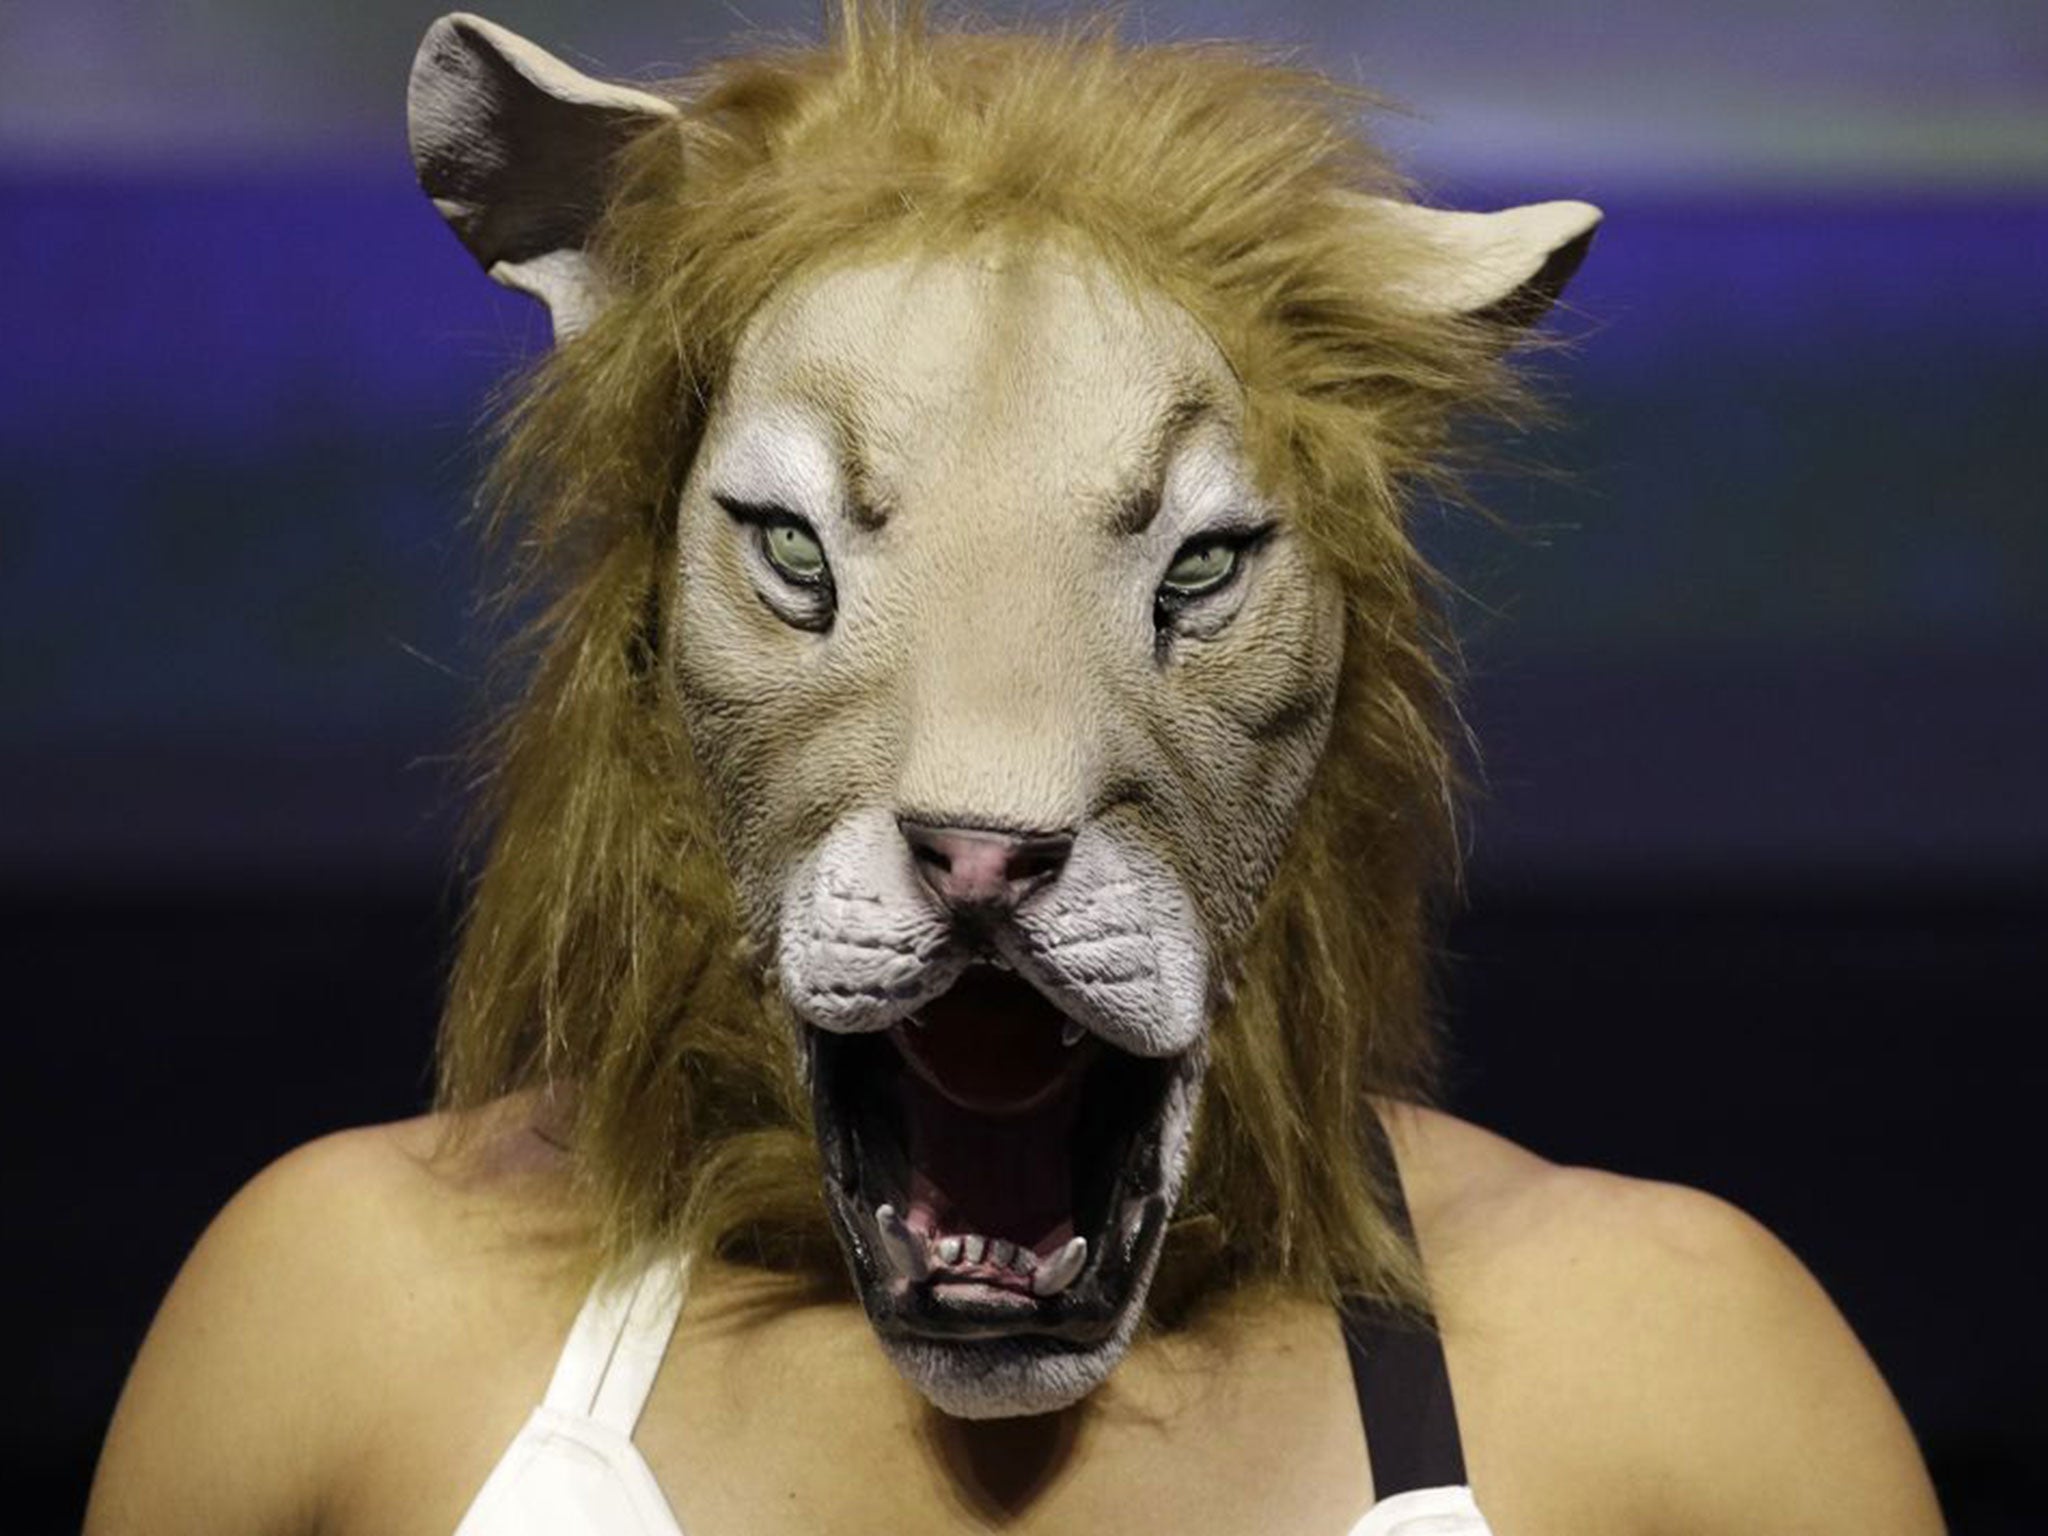 Nunes took to the scales wearing a lion mask before staring down Rousey